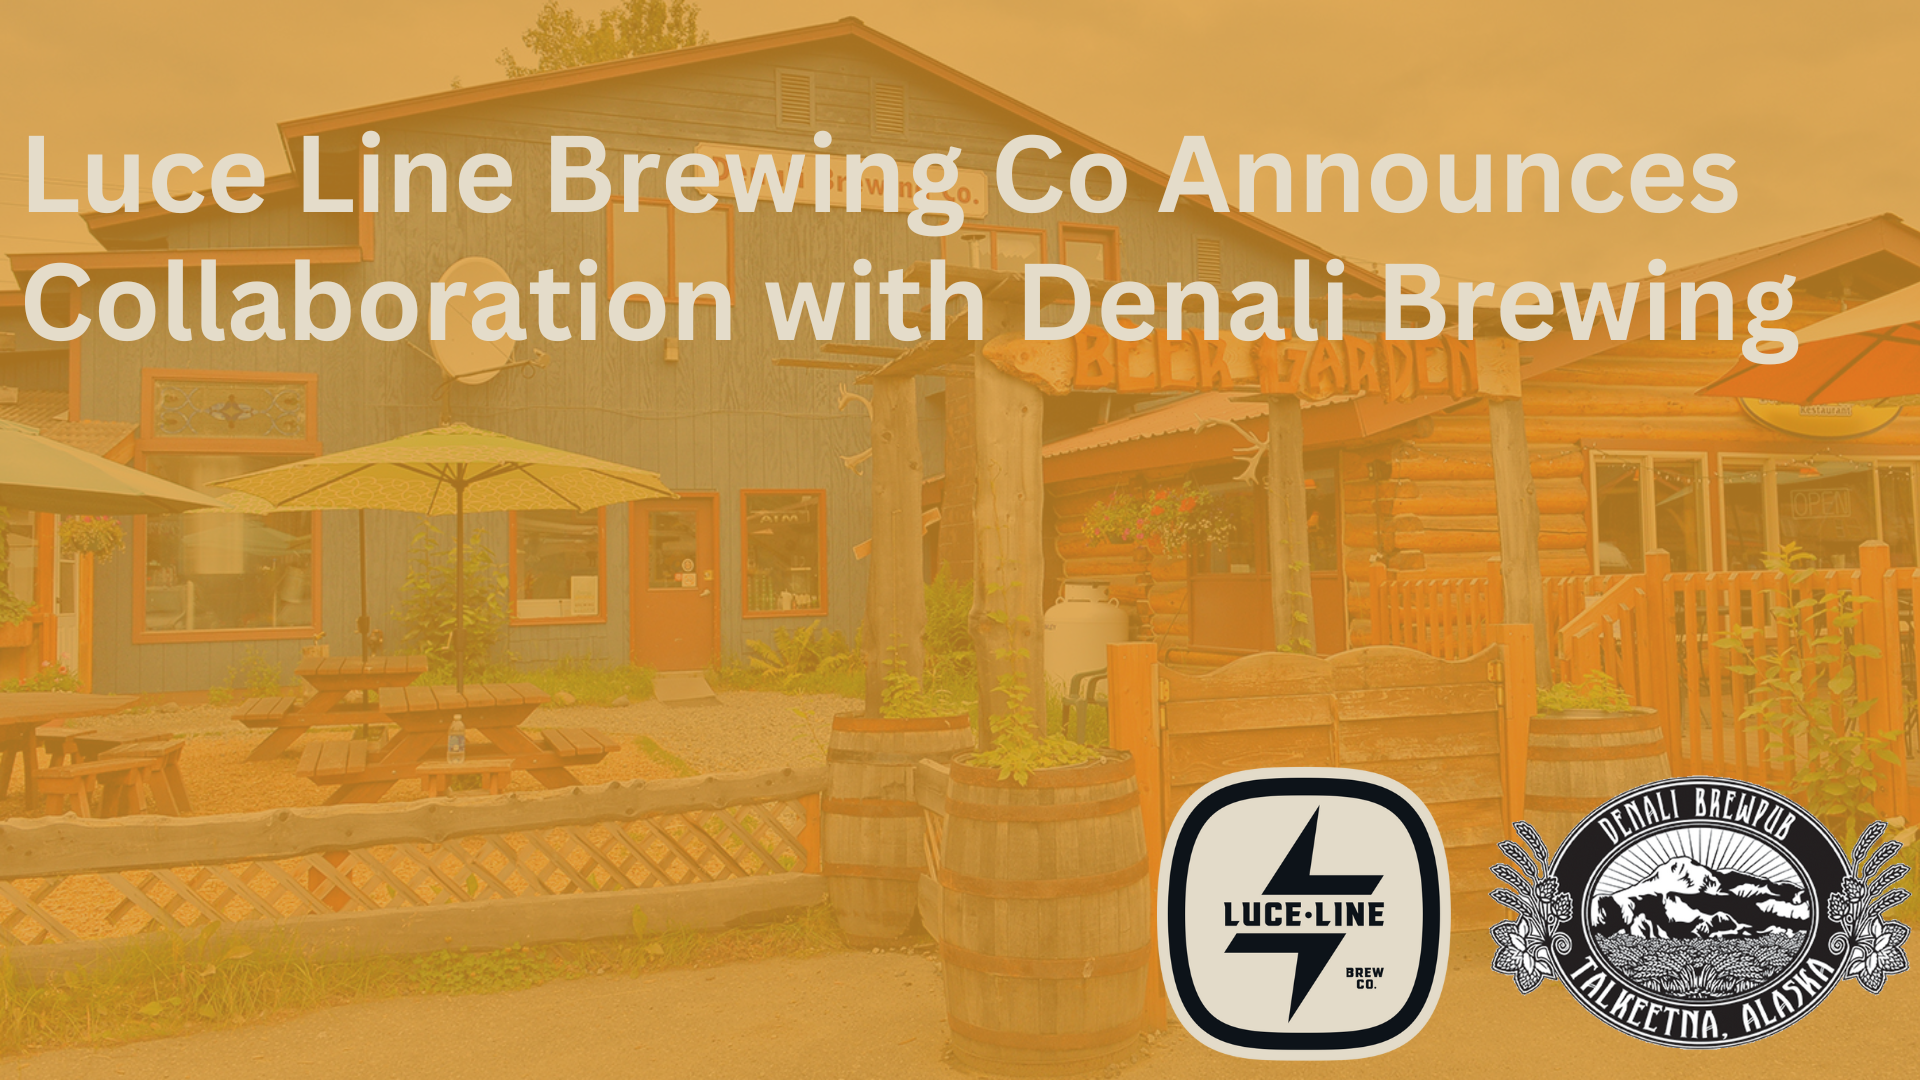 Luce Line Brewing Co Announces Collaboration with Denali Brewing